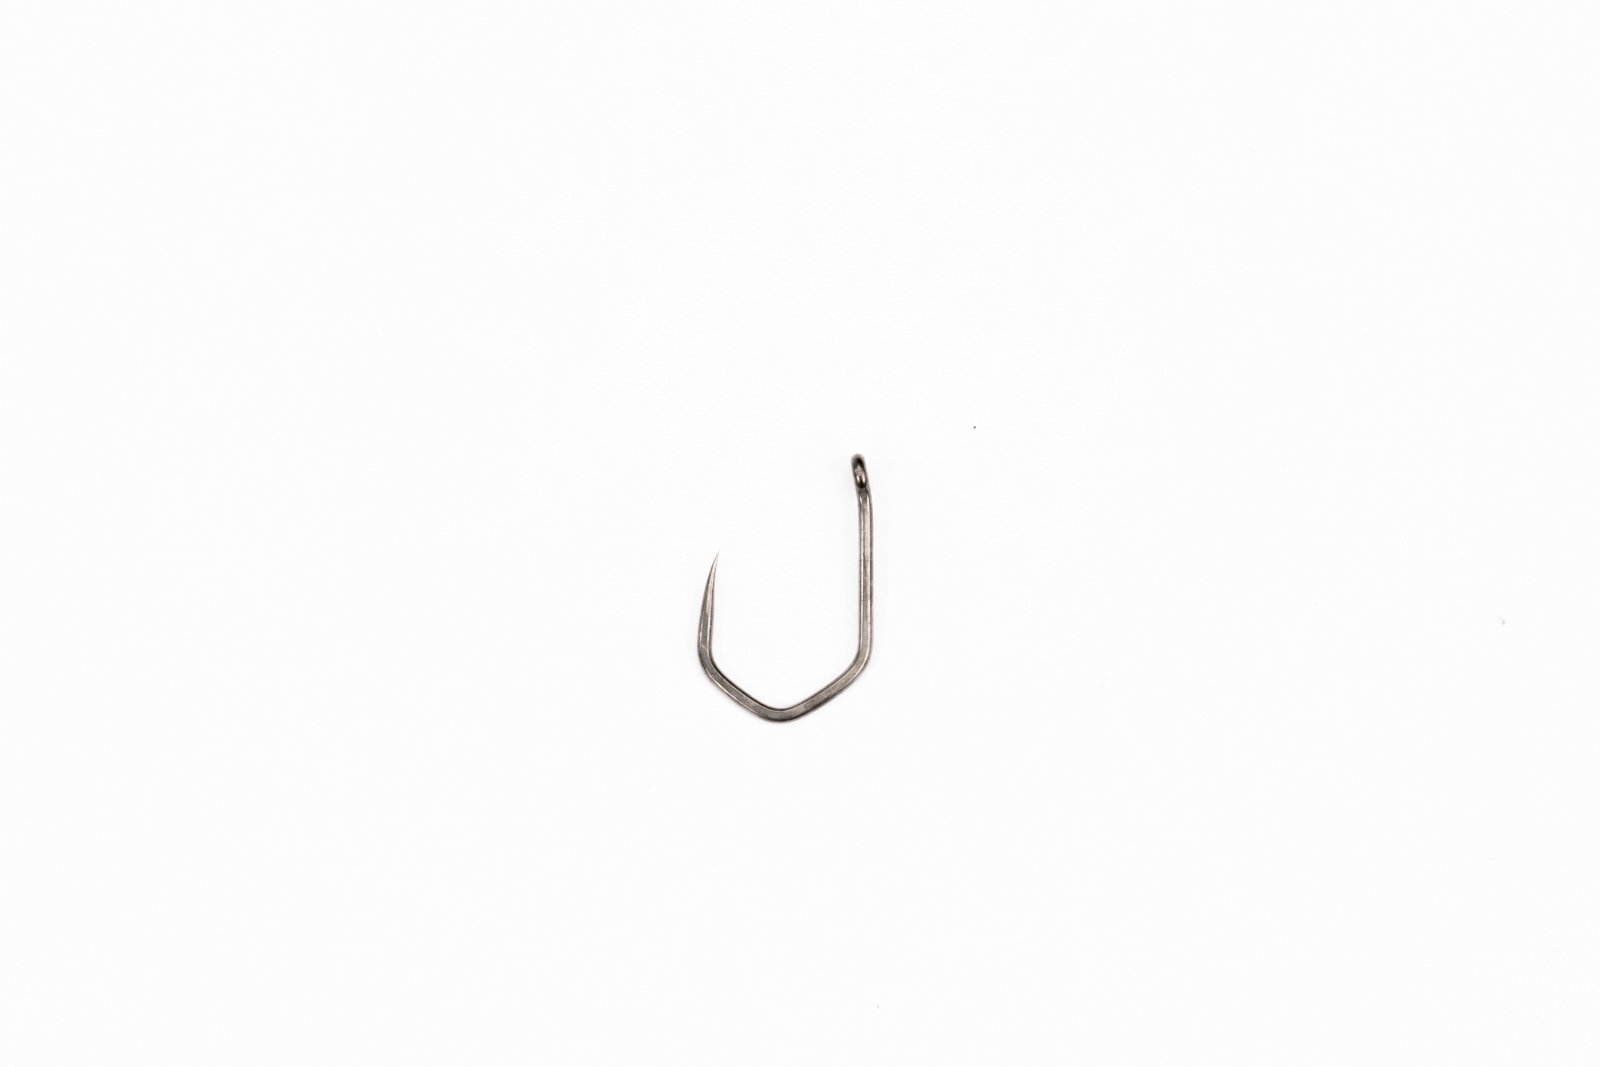 Nash Claw Size 4 Barbless Hooks & Sharpening Tackle T6174 International Shop Europe